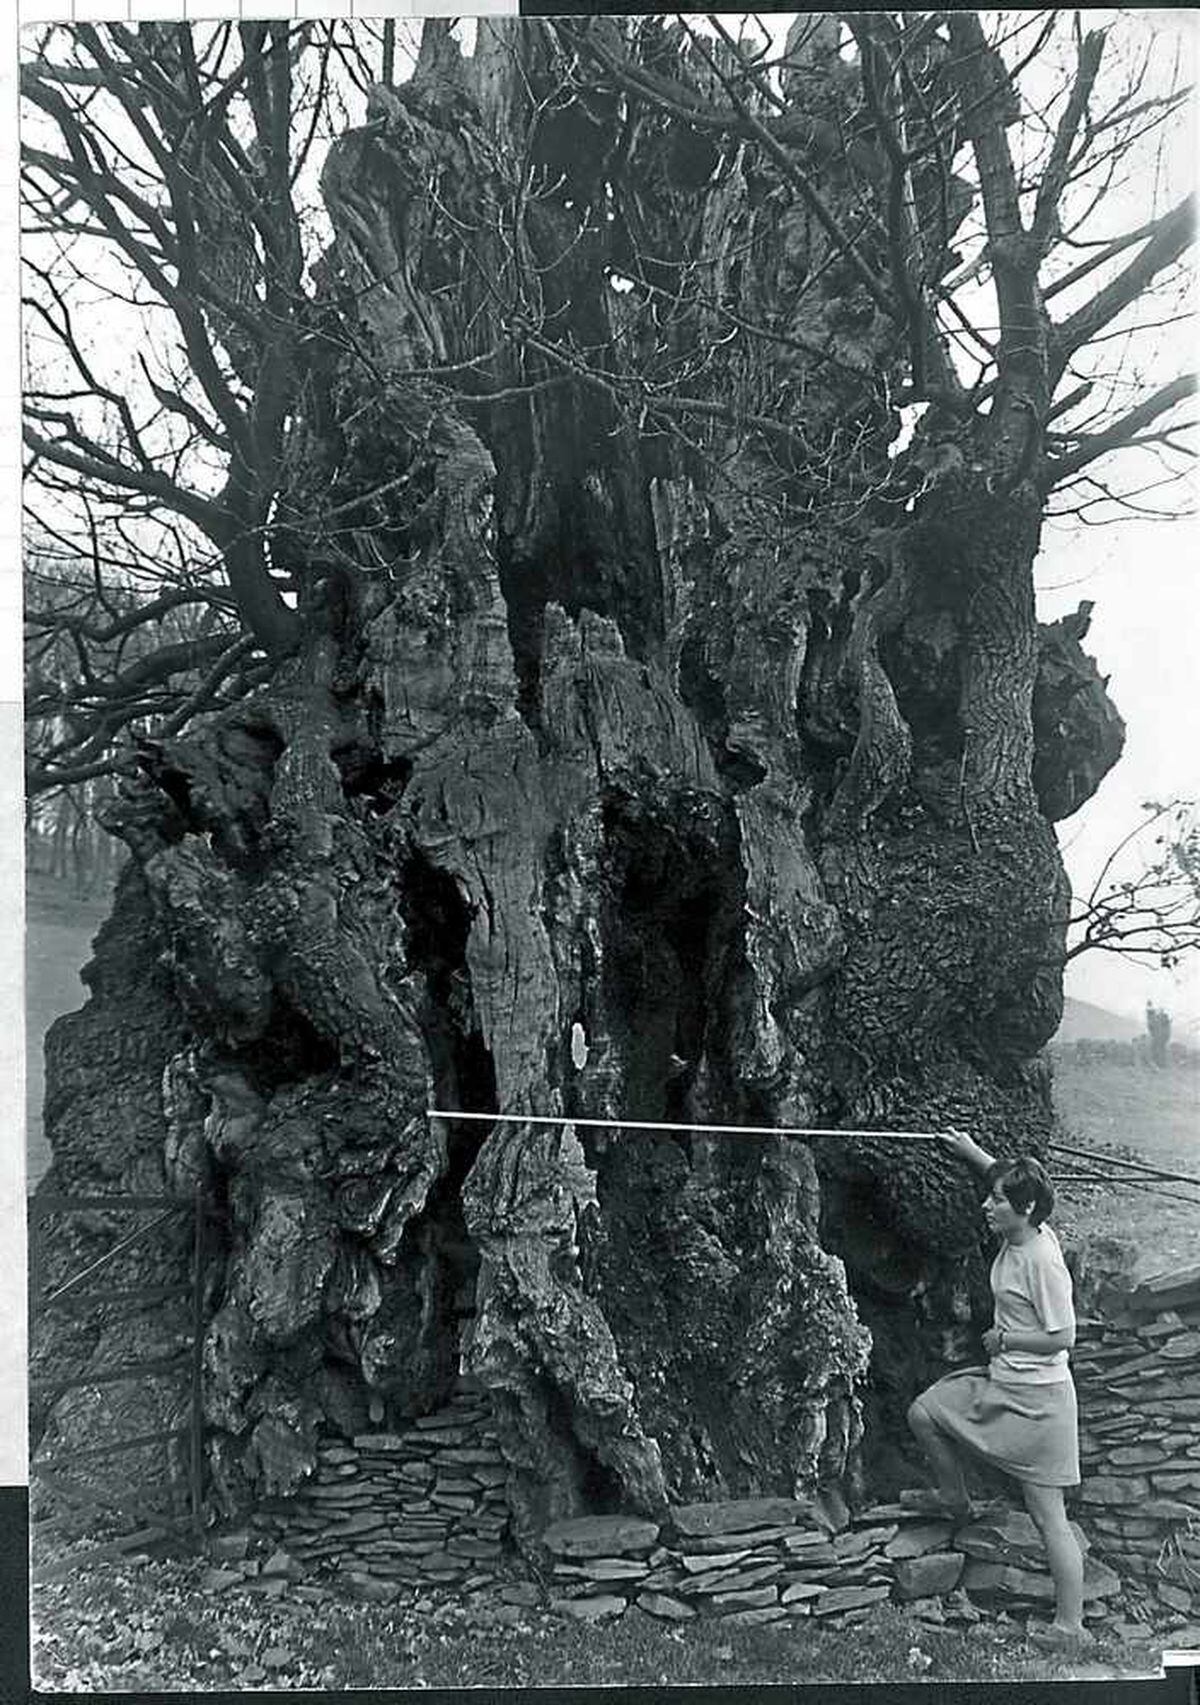 The Pontfadog Oak was measured by Josephine Morris at 42ft around its girth on April 6, 1971